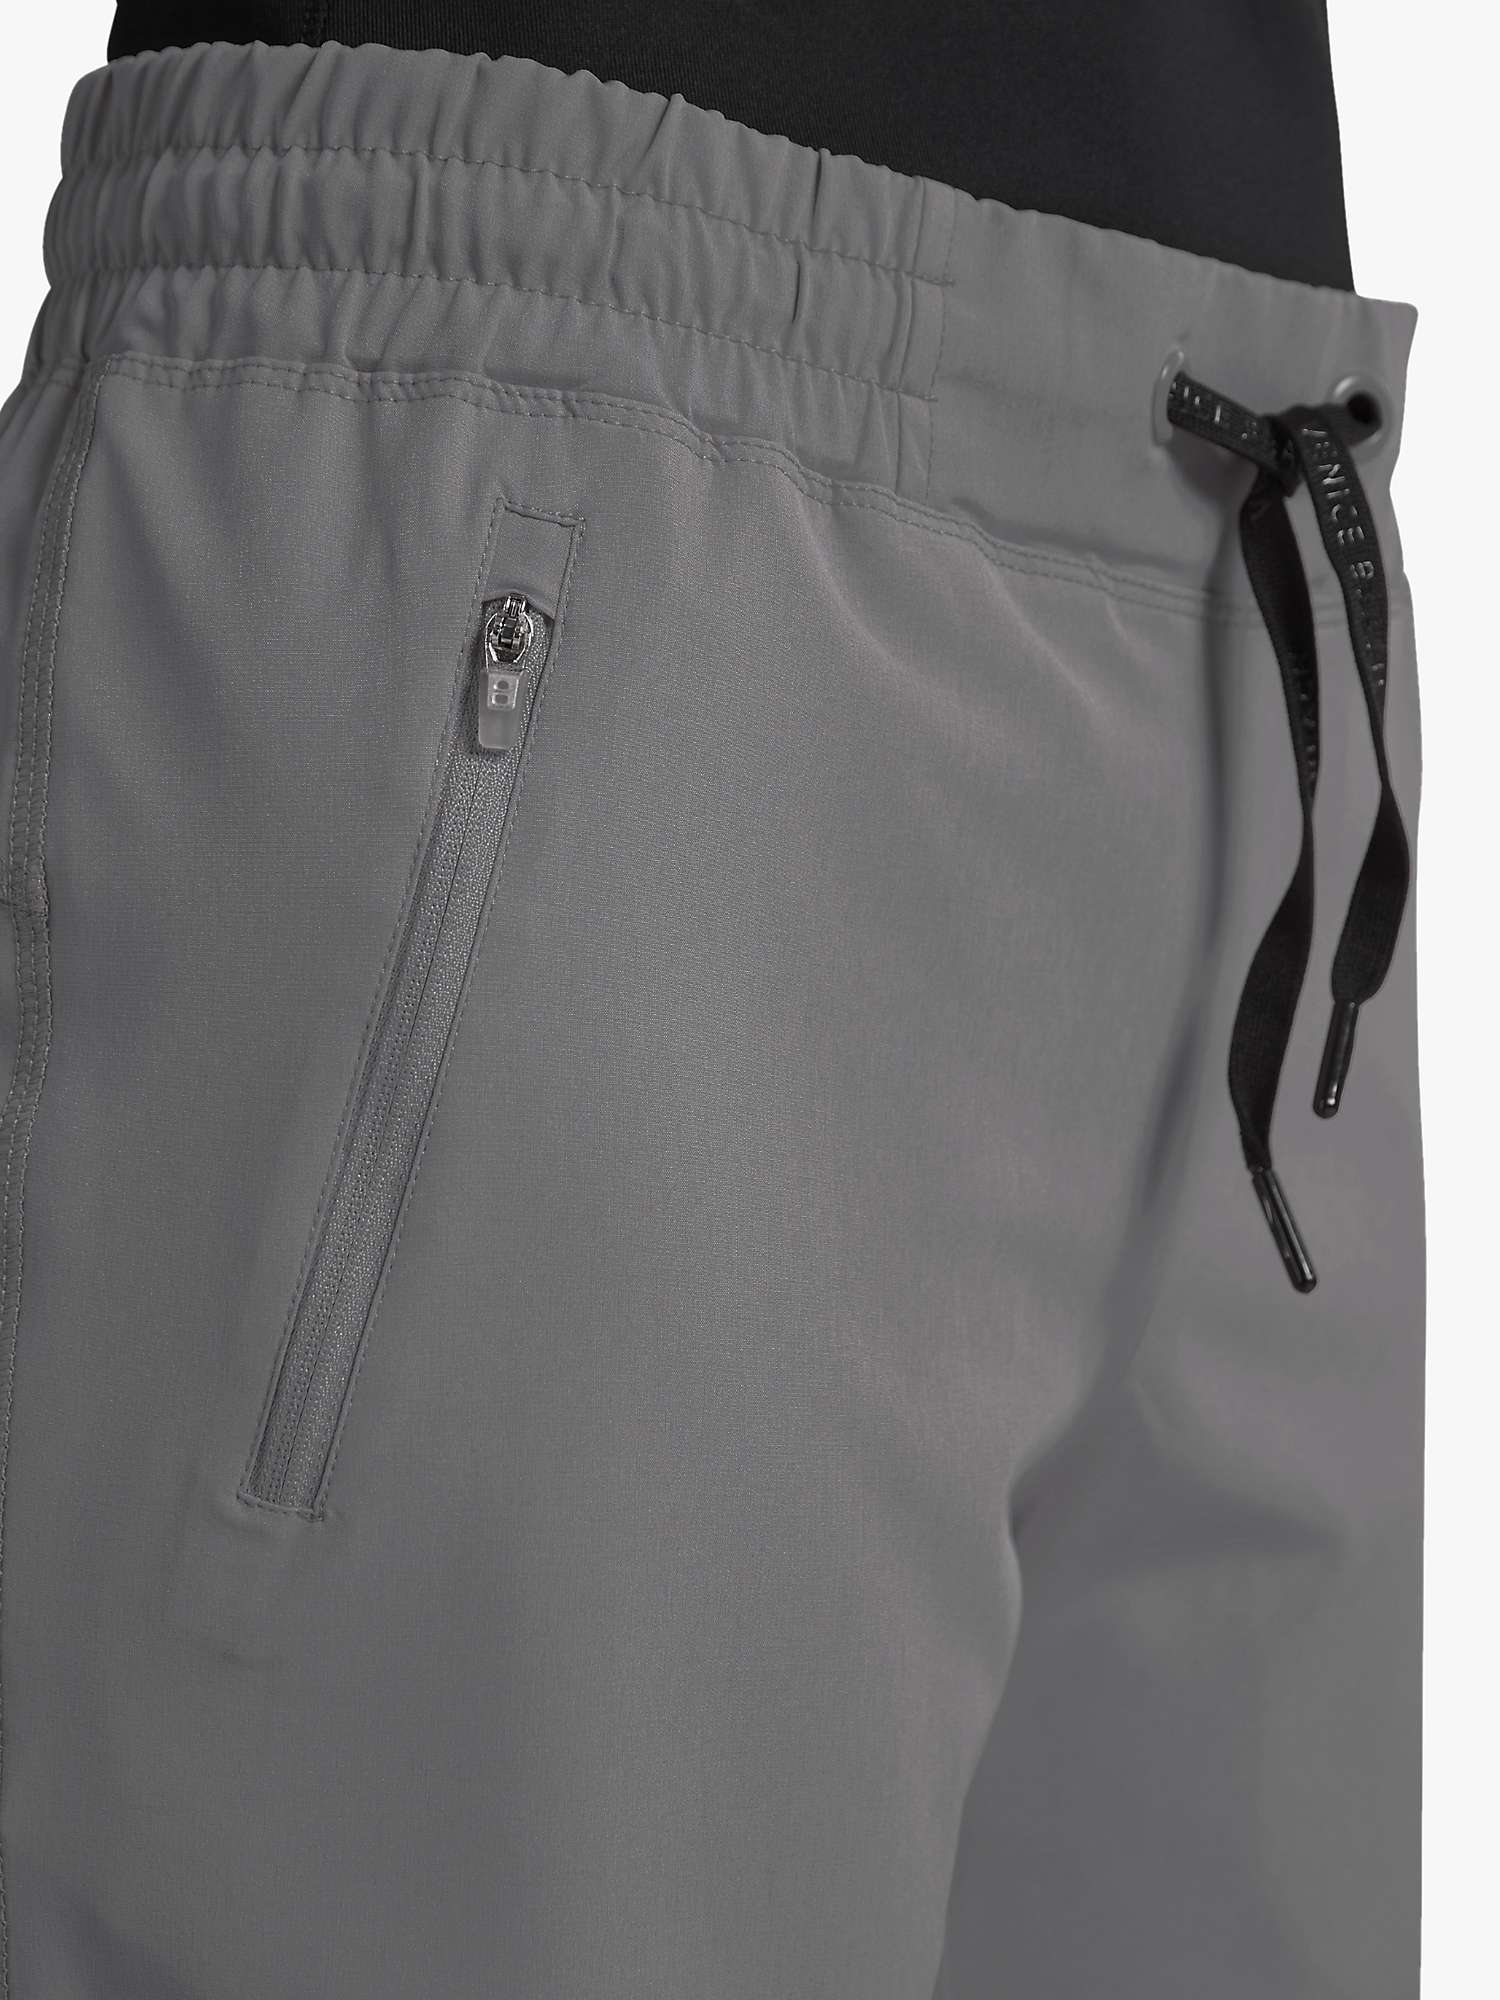 Venice Beach Shelby Shorts, Graphite at John Lewis & Partners